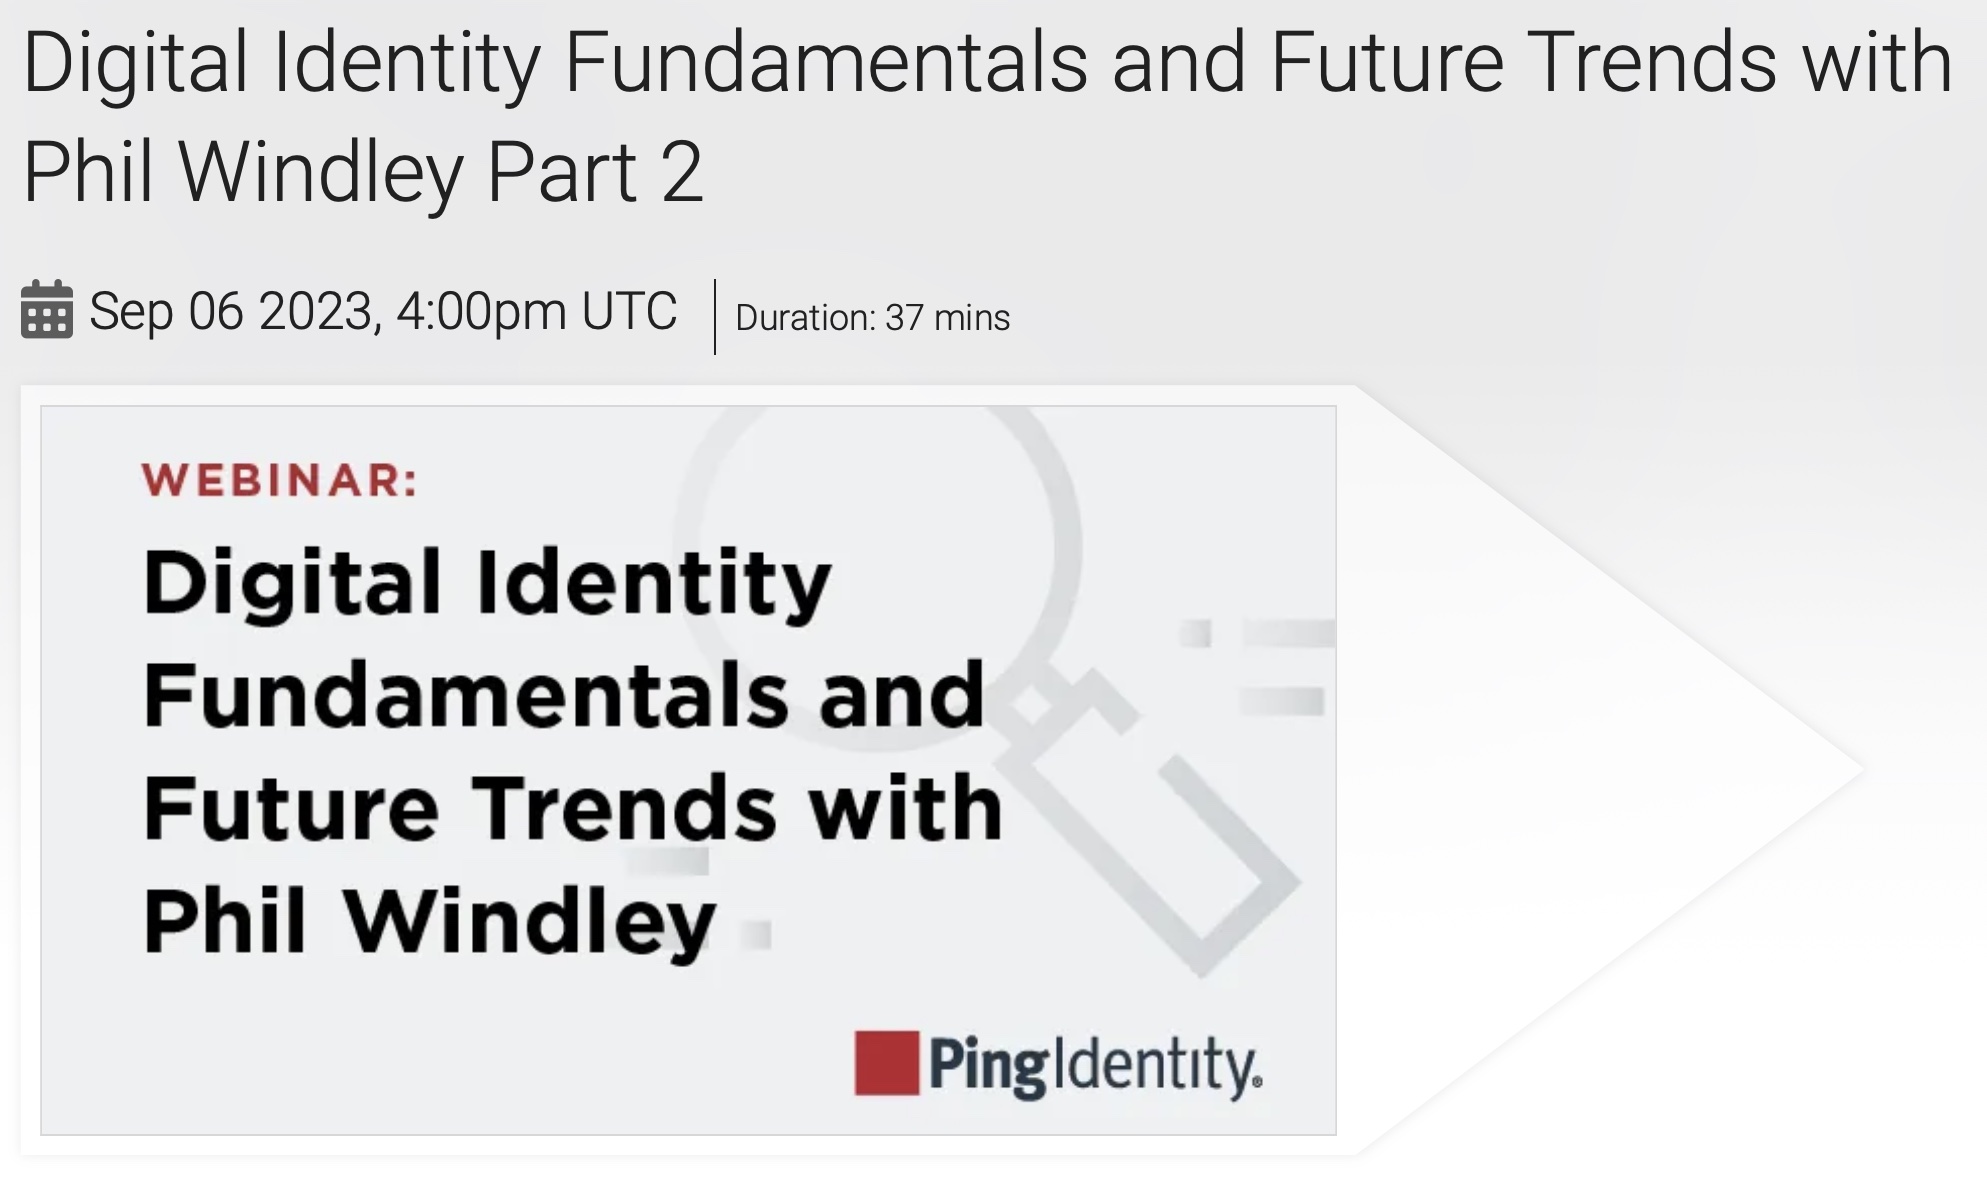 Digital Identity Fundamentals and Future Trends with Phil Windley Part 2